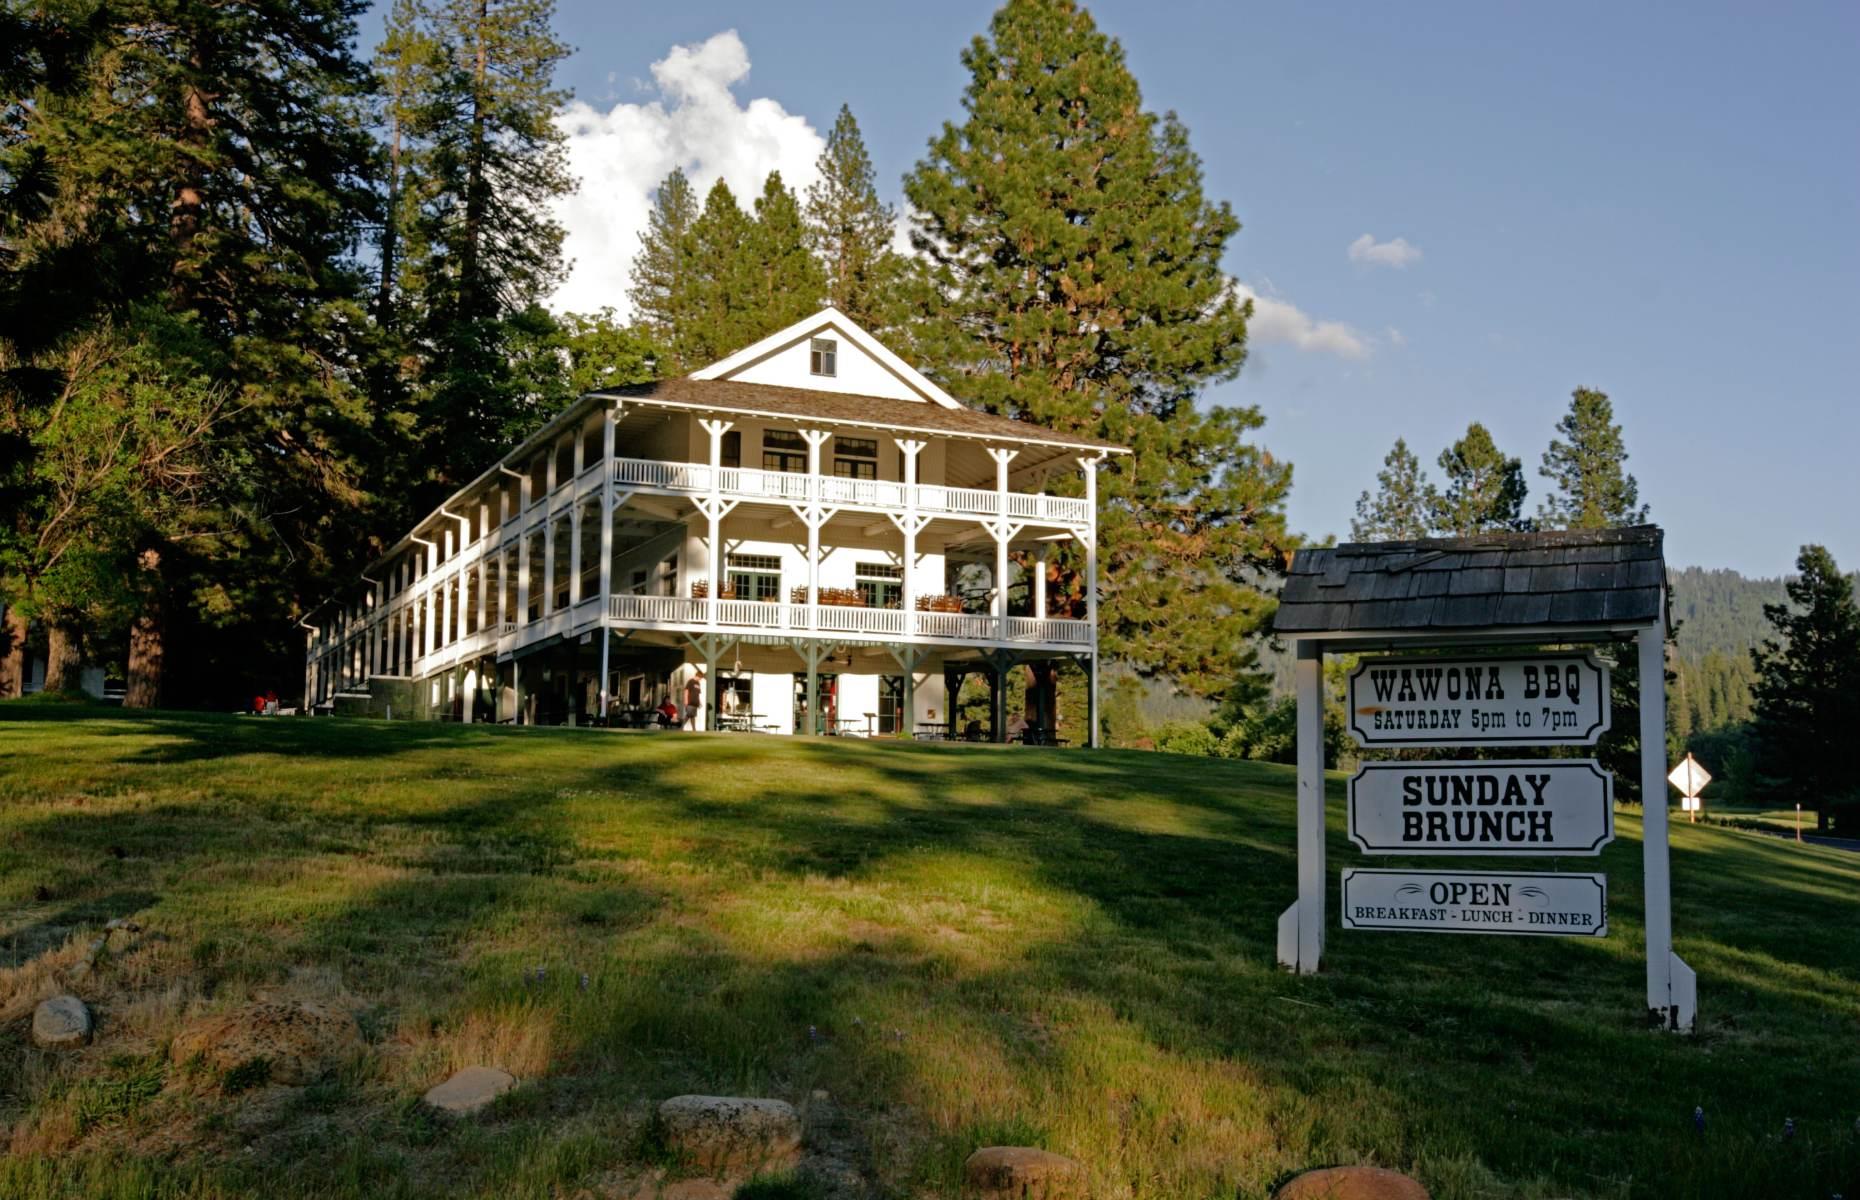 <p>One of the first accommodations in Yosemite National Park was the Wawona Hotel (pictured). The Victorian lodge still welcomes guests today and is a National Historic Landmark. It is remembered as one of the Golden State’s original mountain resort hotels – Teddy Roosevelt famously visited – and is one of the only original hotels in Yosemite still standing. The earliest structure on the site, a humble log cabin, was built in the mid-19th century by former gold prospector Galen Clark, who was the first guardian of the Yosemite Grant.</p>